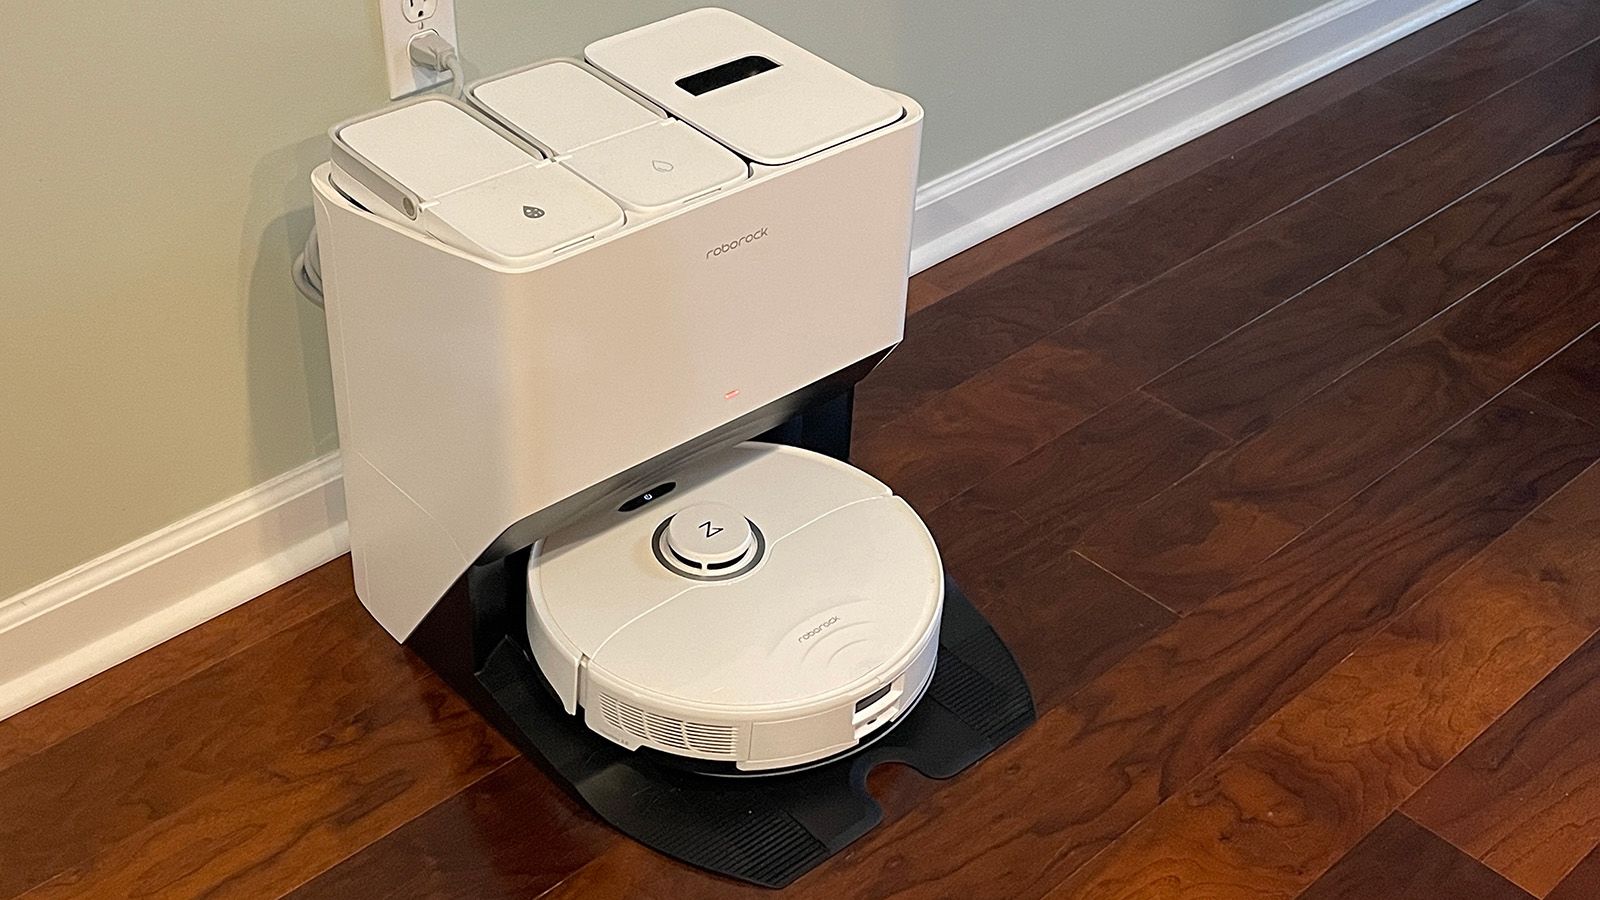 Yeedi's Mop Station Pro robotic vacuum and mop covers all floor types for  $500 (Save $300)